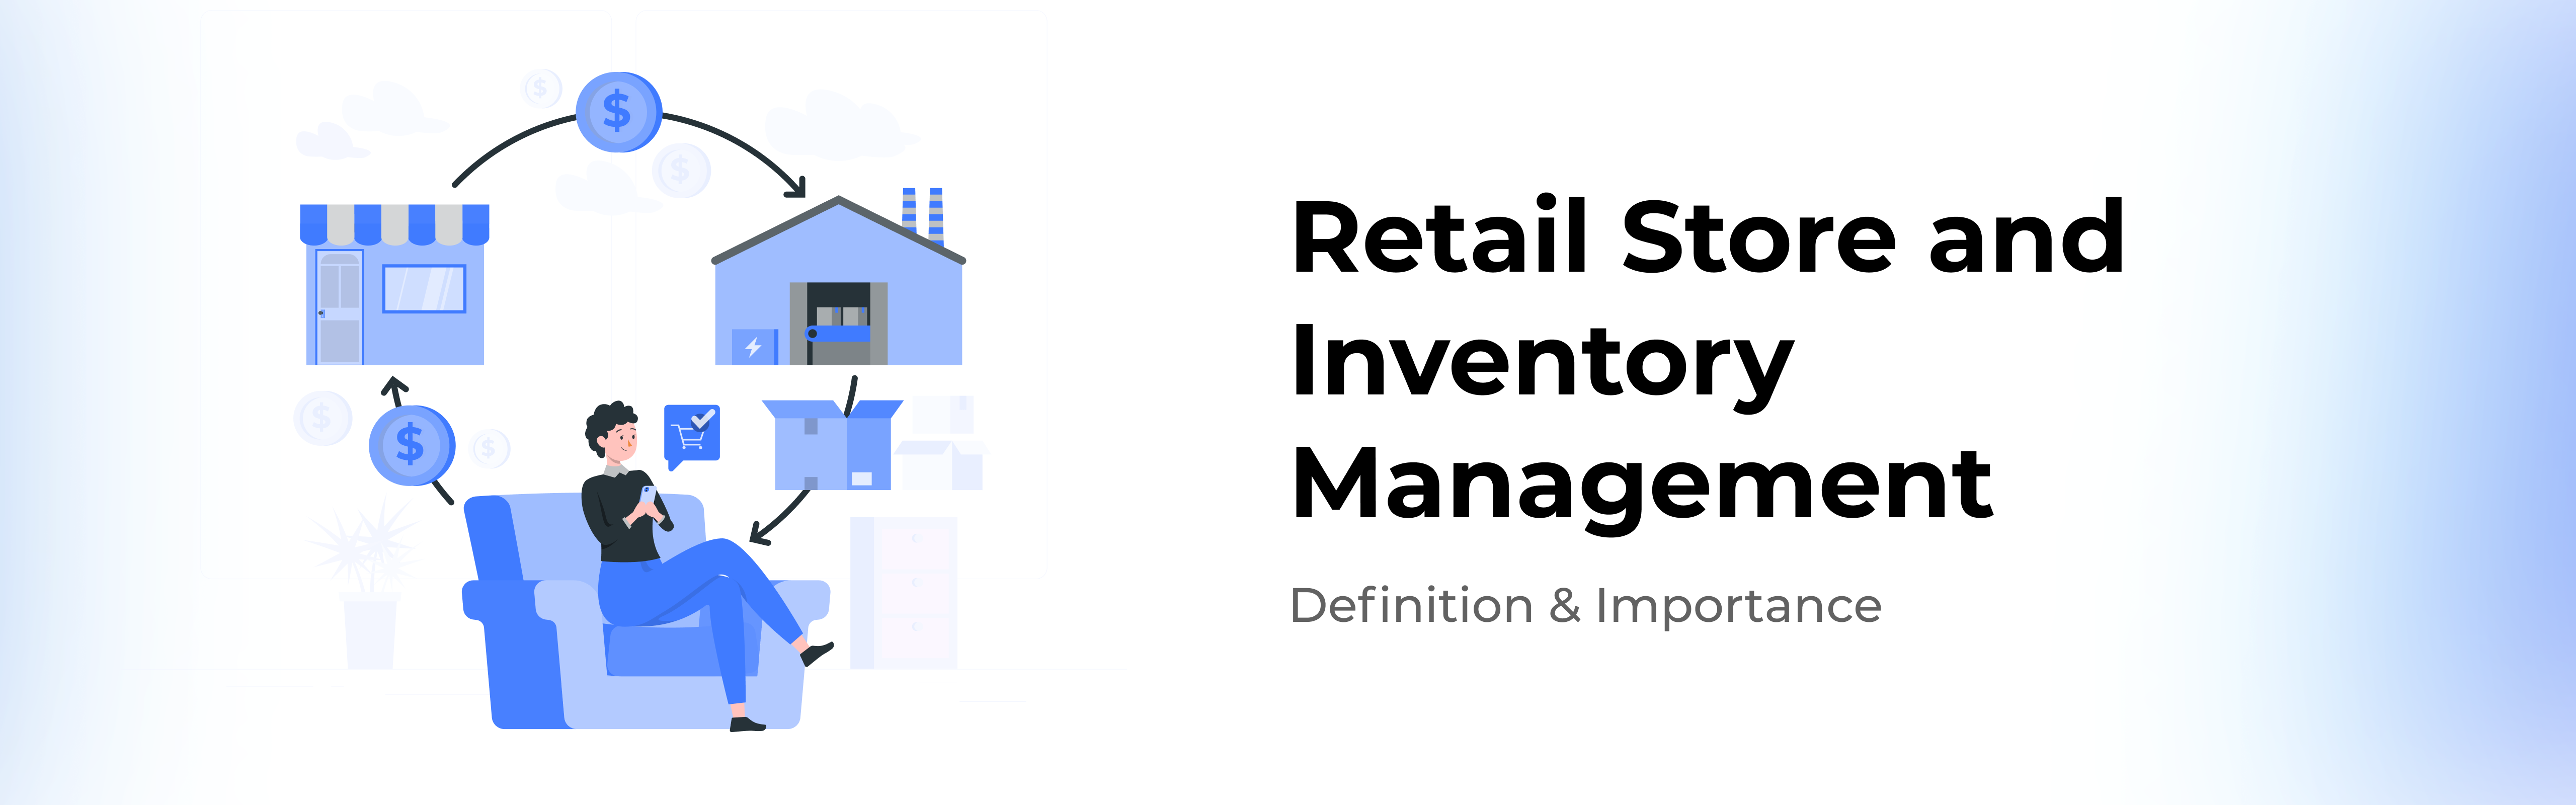 retail-store-management-and-inventory-management